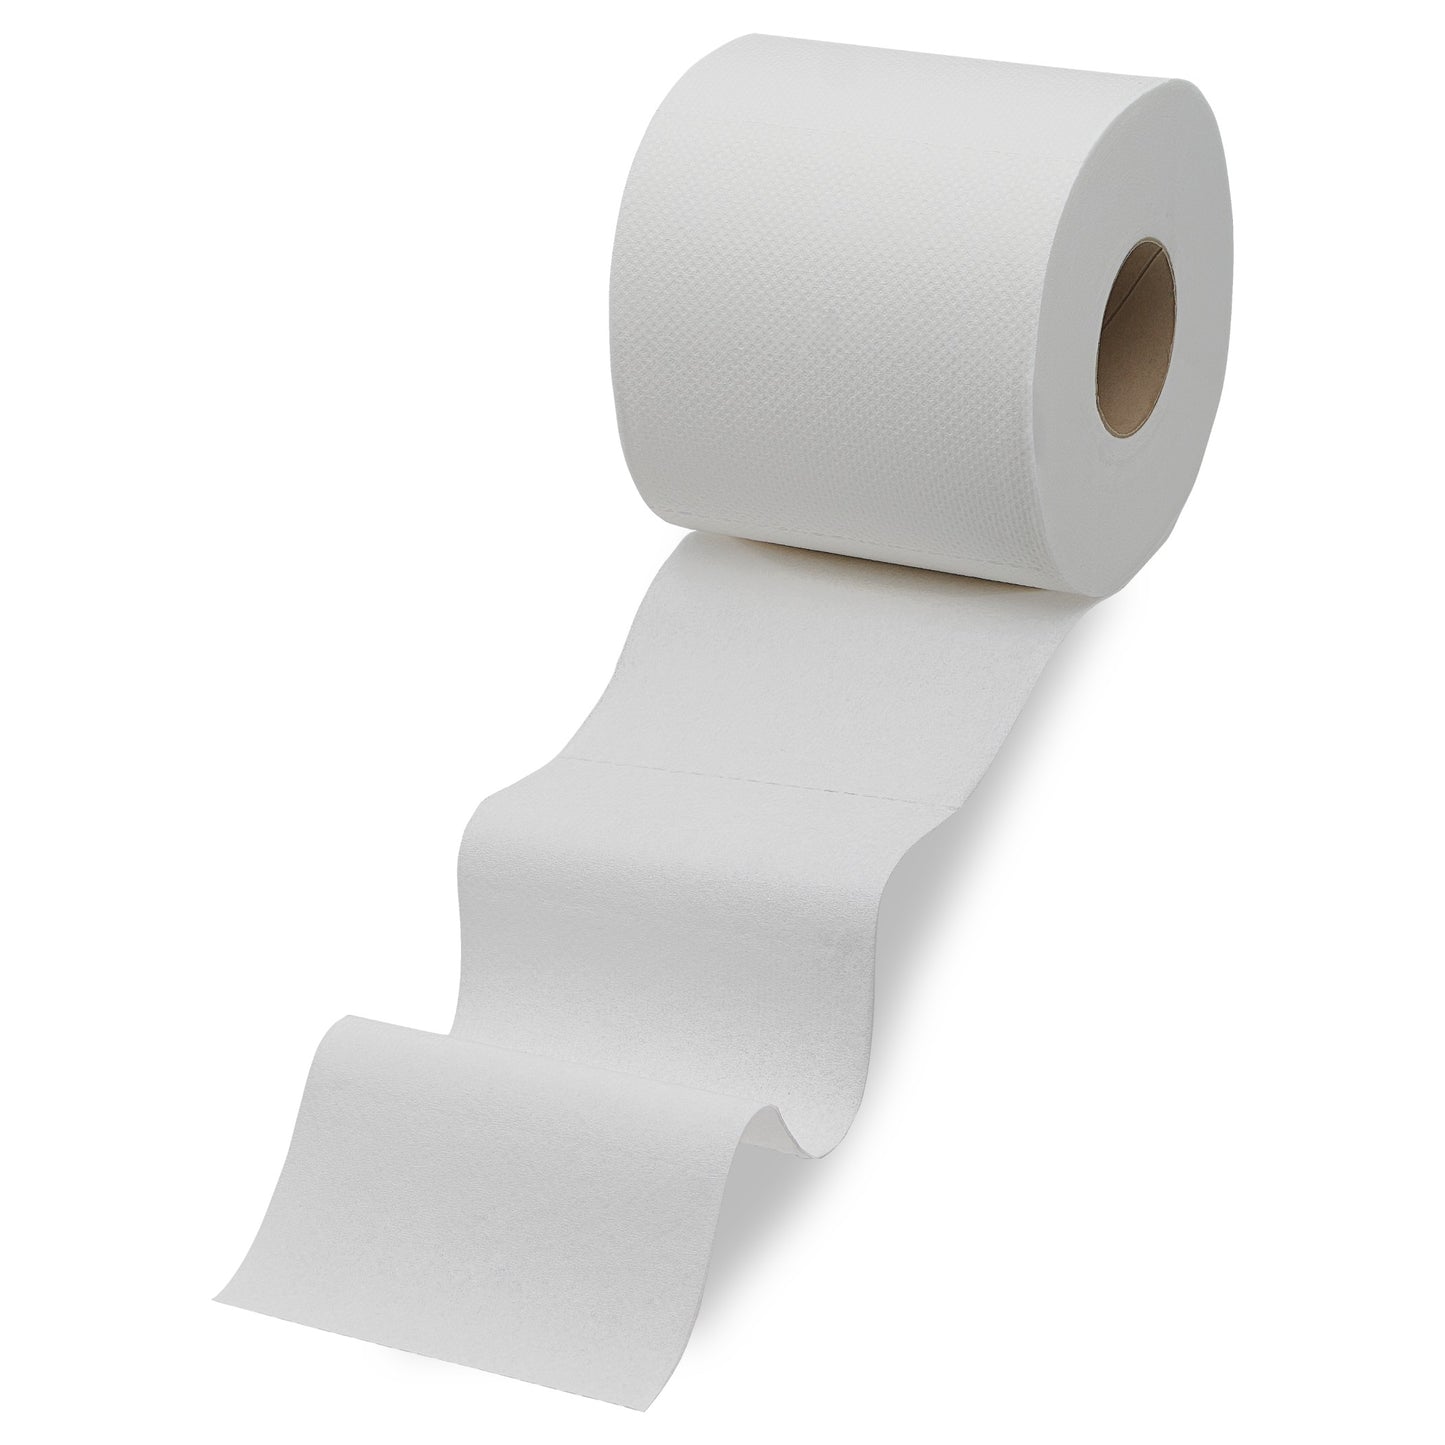 Bamboo Toilet Paper Subscription